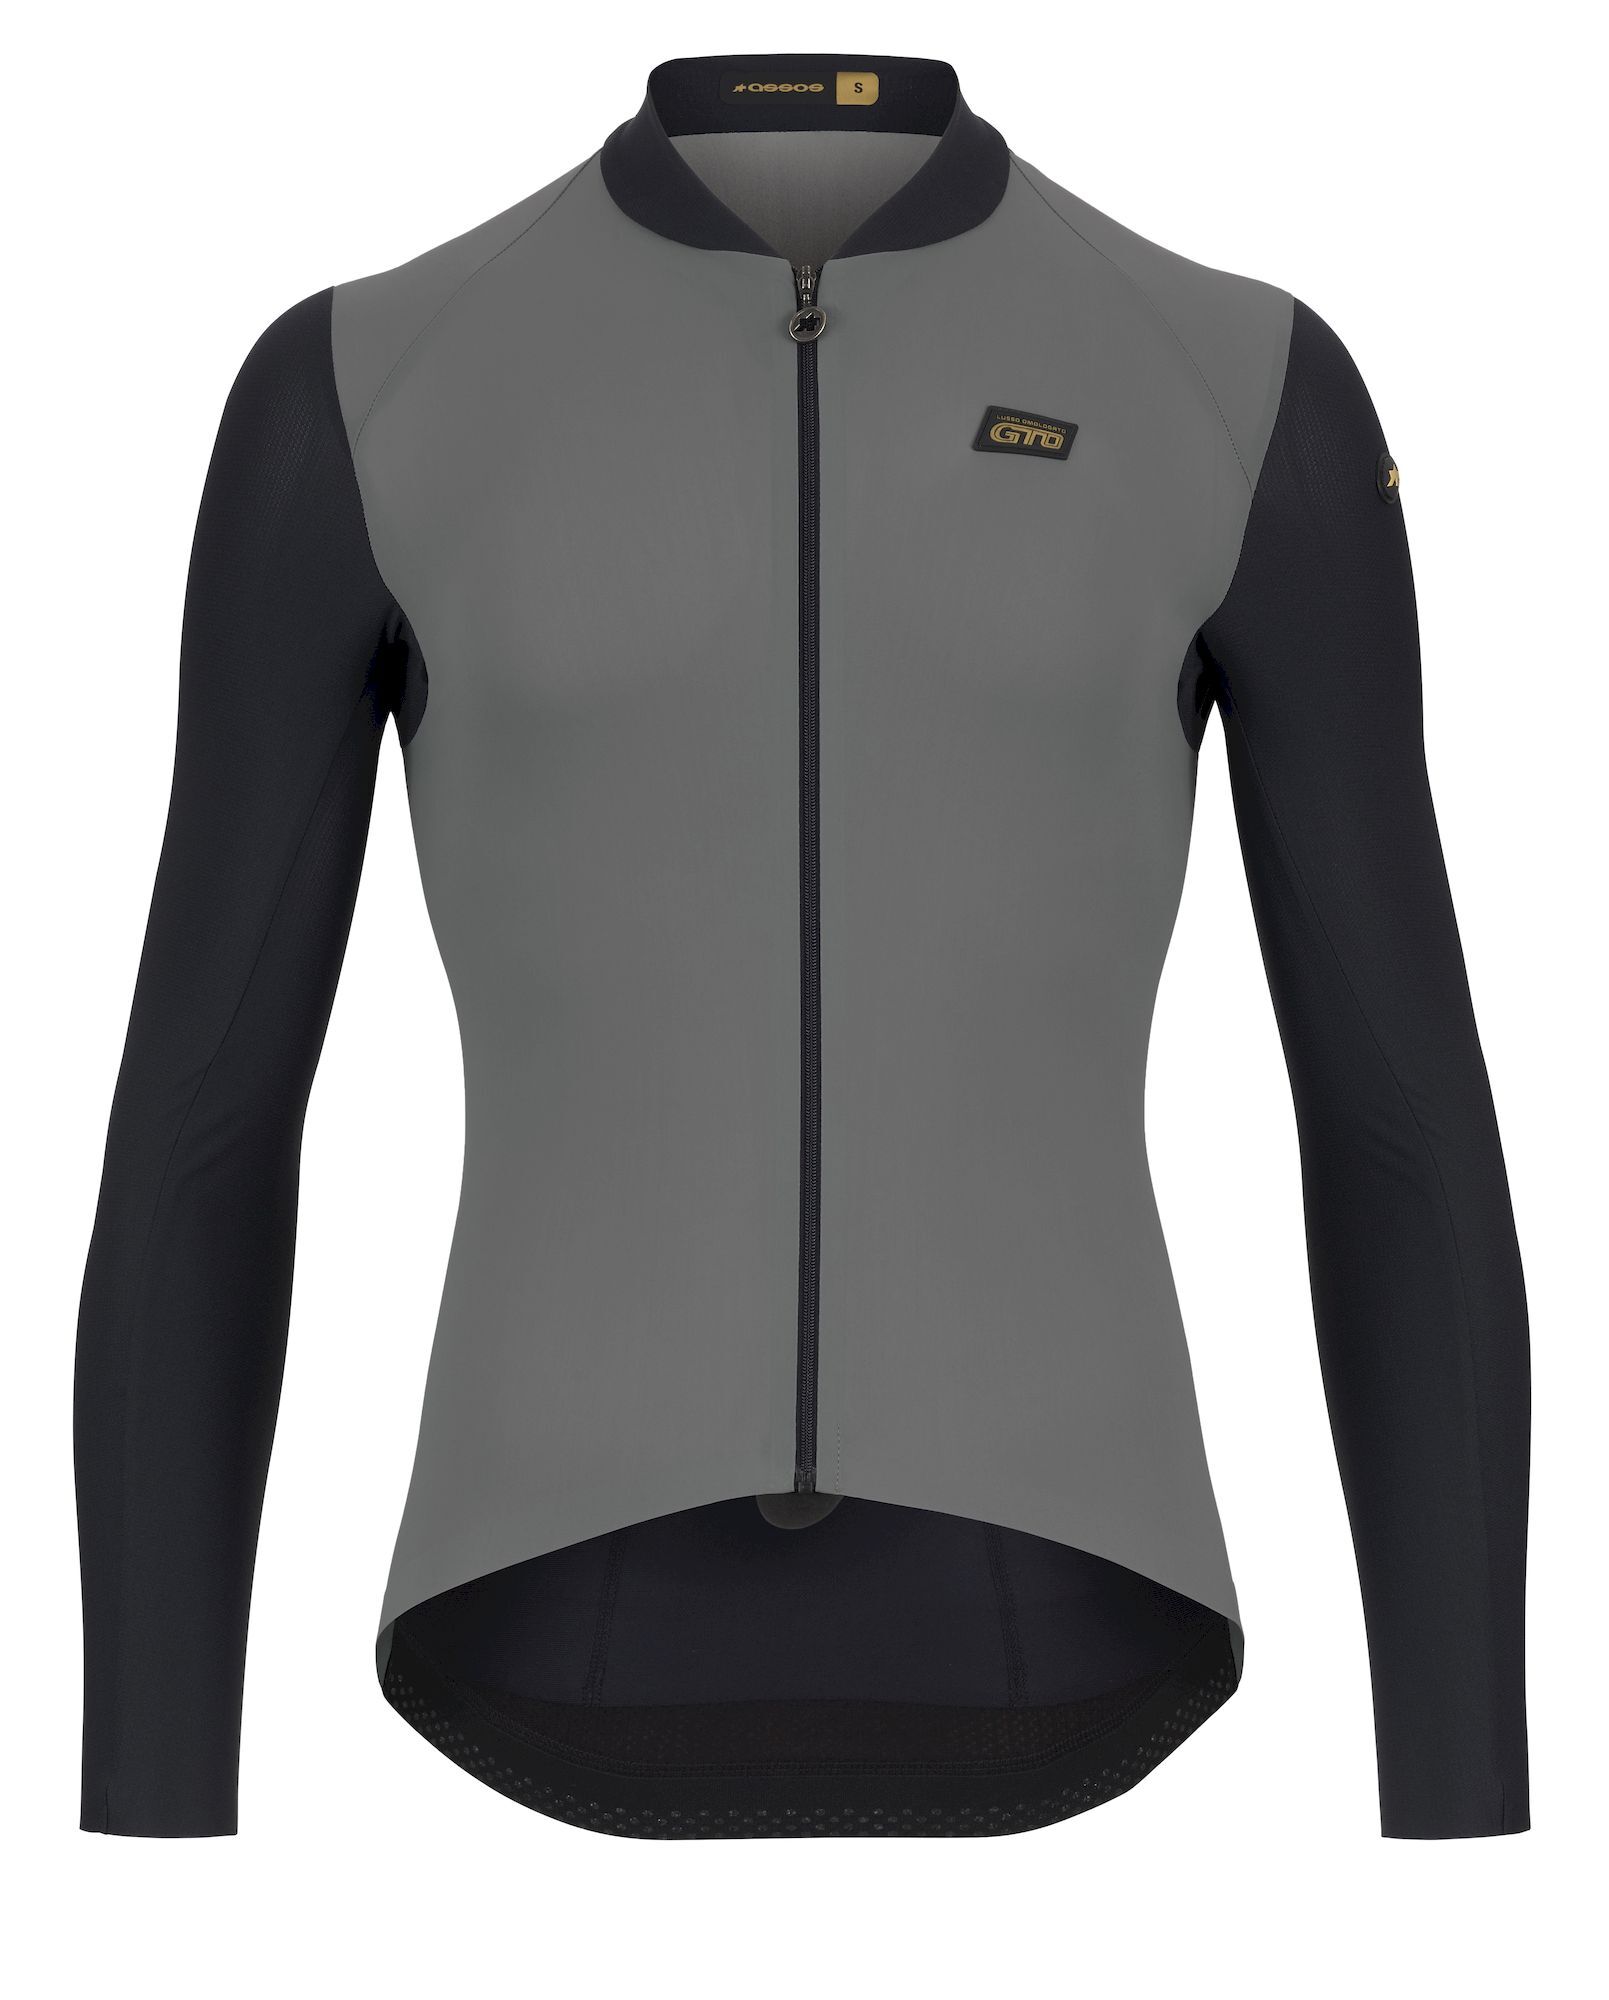 Assos Mille GTO LS Jersey C2 - Maillot vélo homme | Hardloop